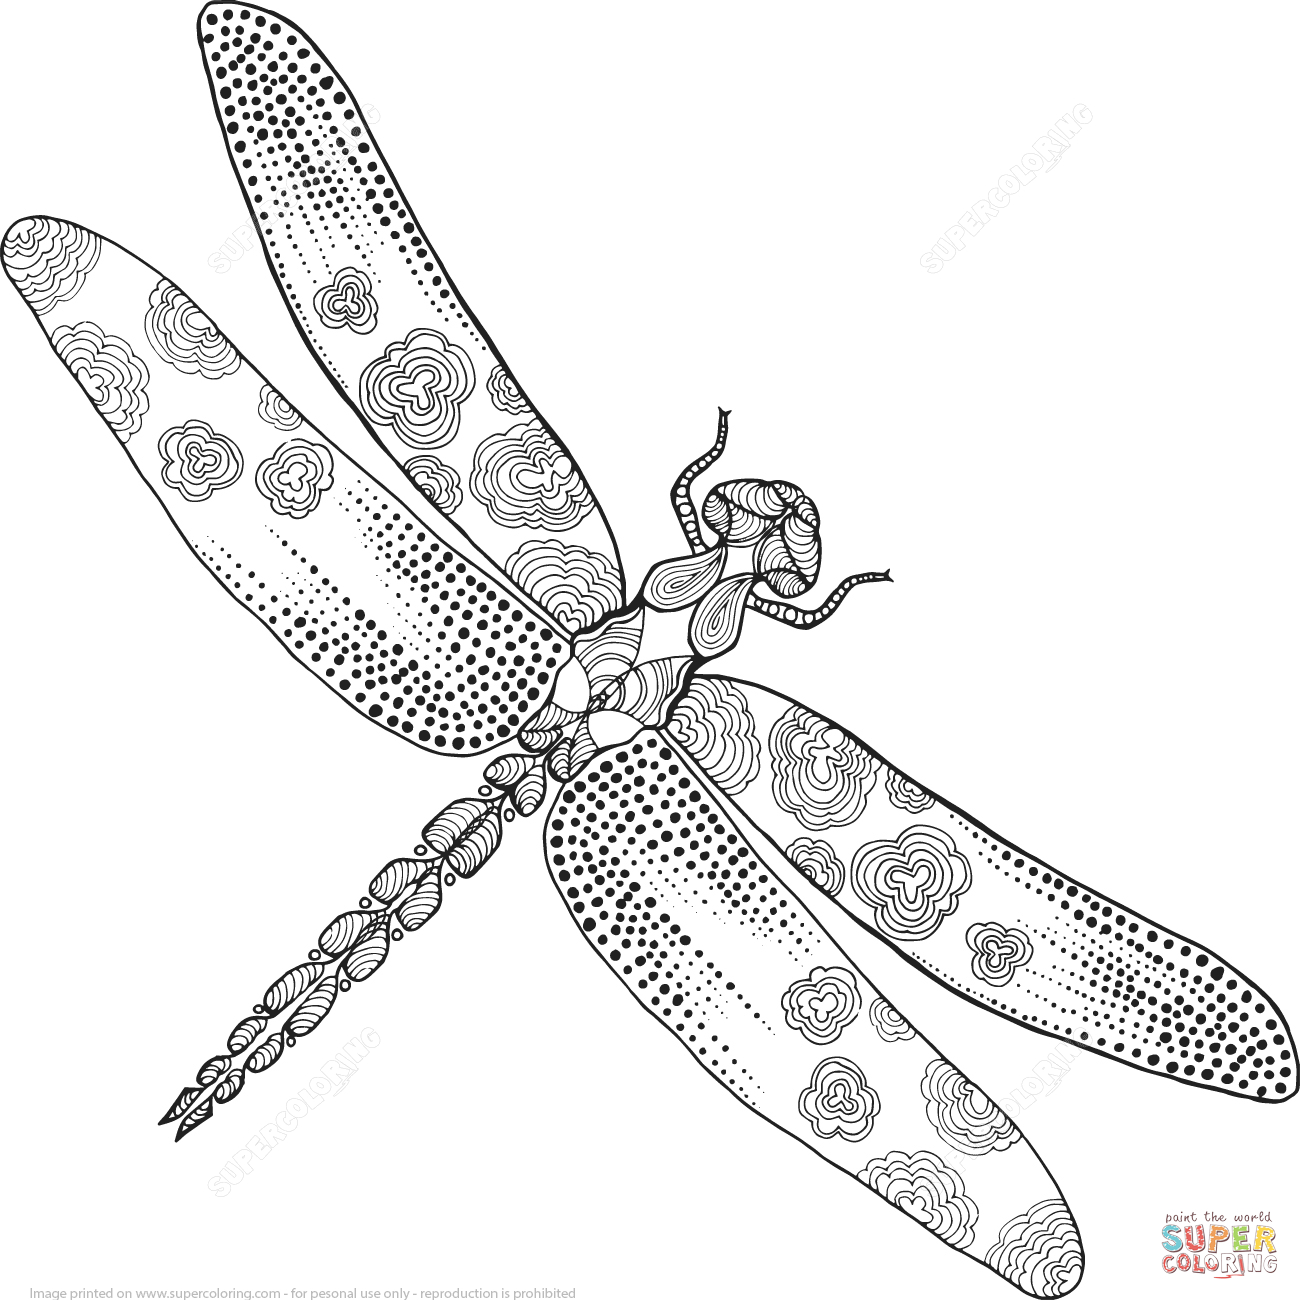 Zentangle Dragonfly Coloring Page | Free Printable Coloring Pages - Free Printable Pictures Of Dragonflies